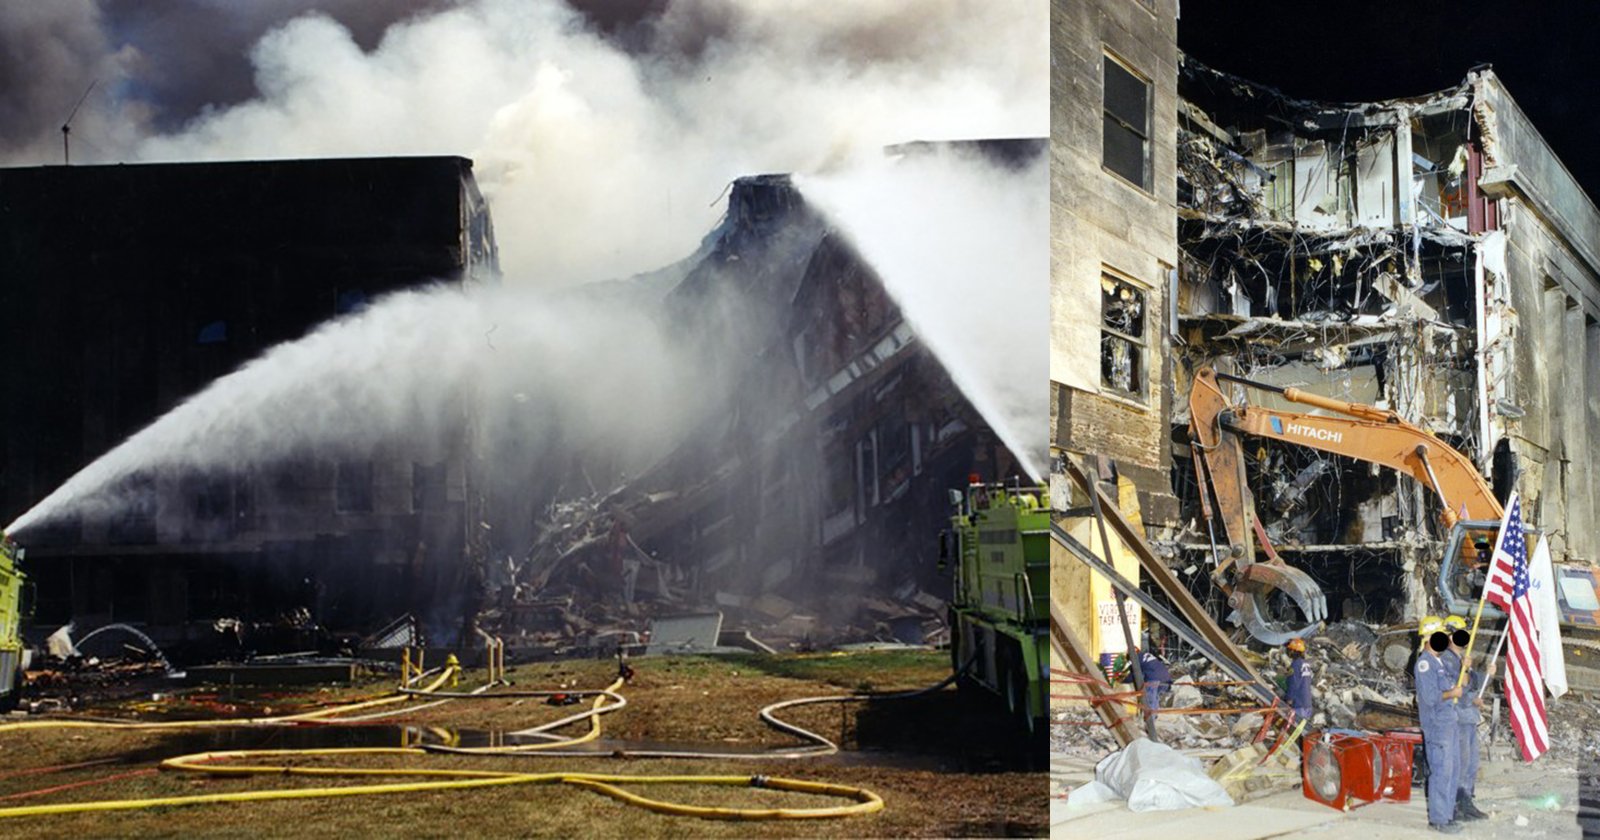 FBI Re-Releases Lost Photos of the Pentagon from 9/11 After Glitch